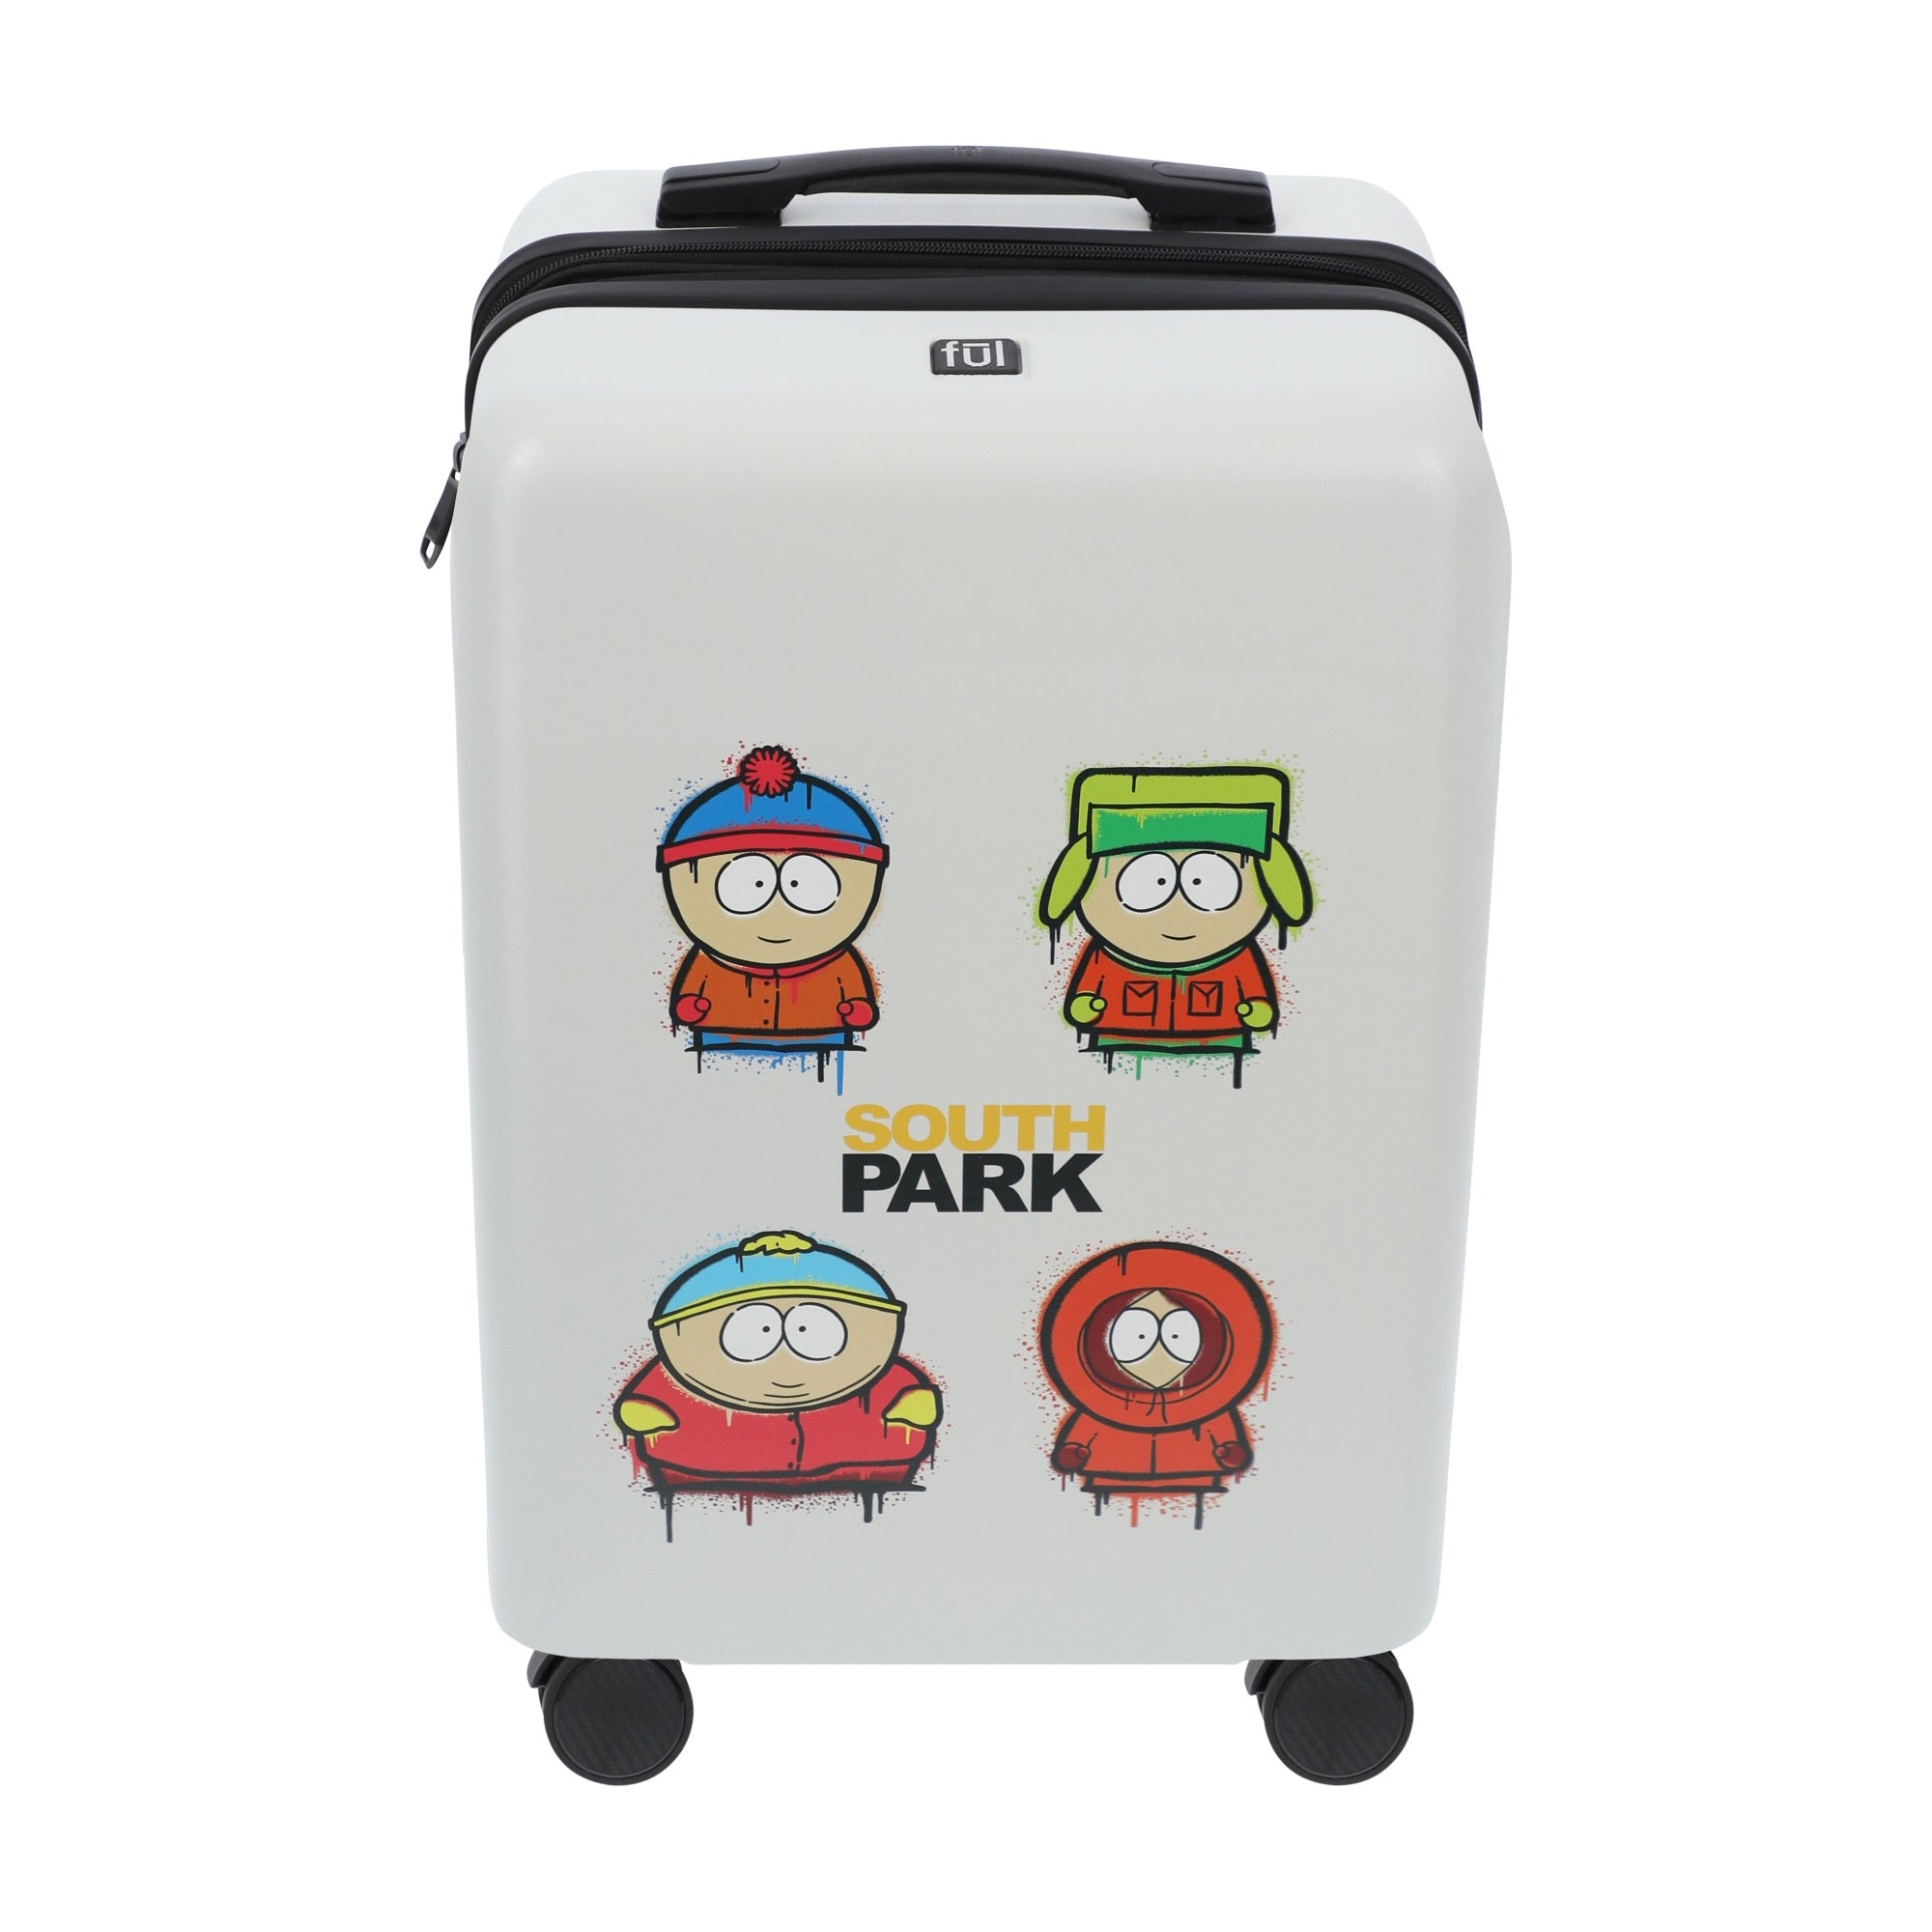 White paramount south park 22.5" carry-on spinner suitcase luggage by Ful